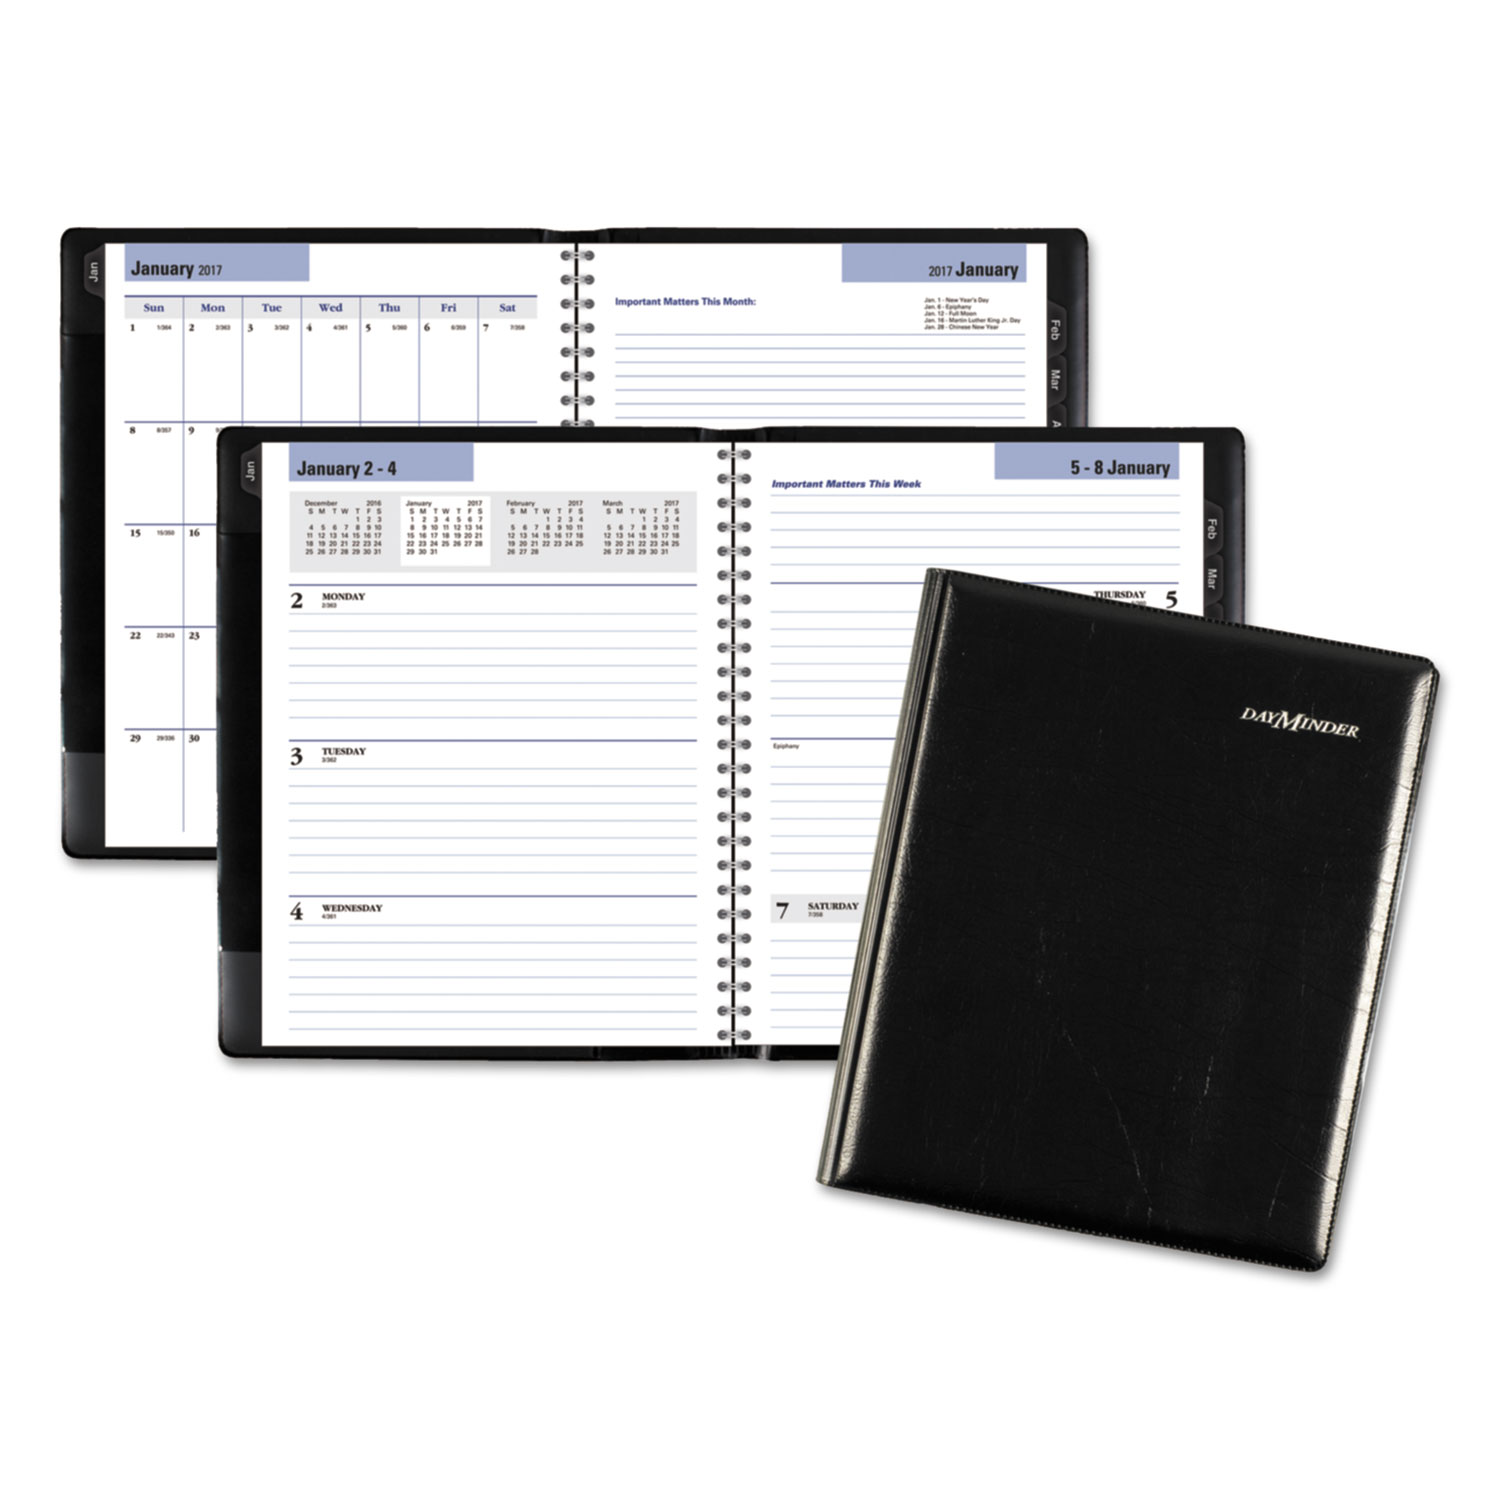 DayMinder AAGG54500 Executive Weekly/Monthly Planner, 6 7/8 x 8 3/4, Black, 2017